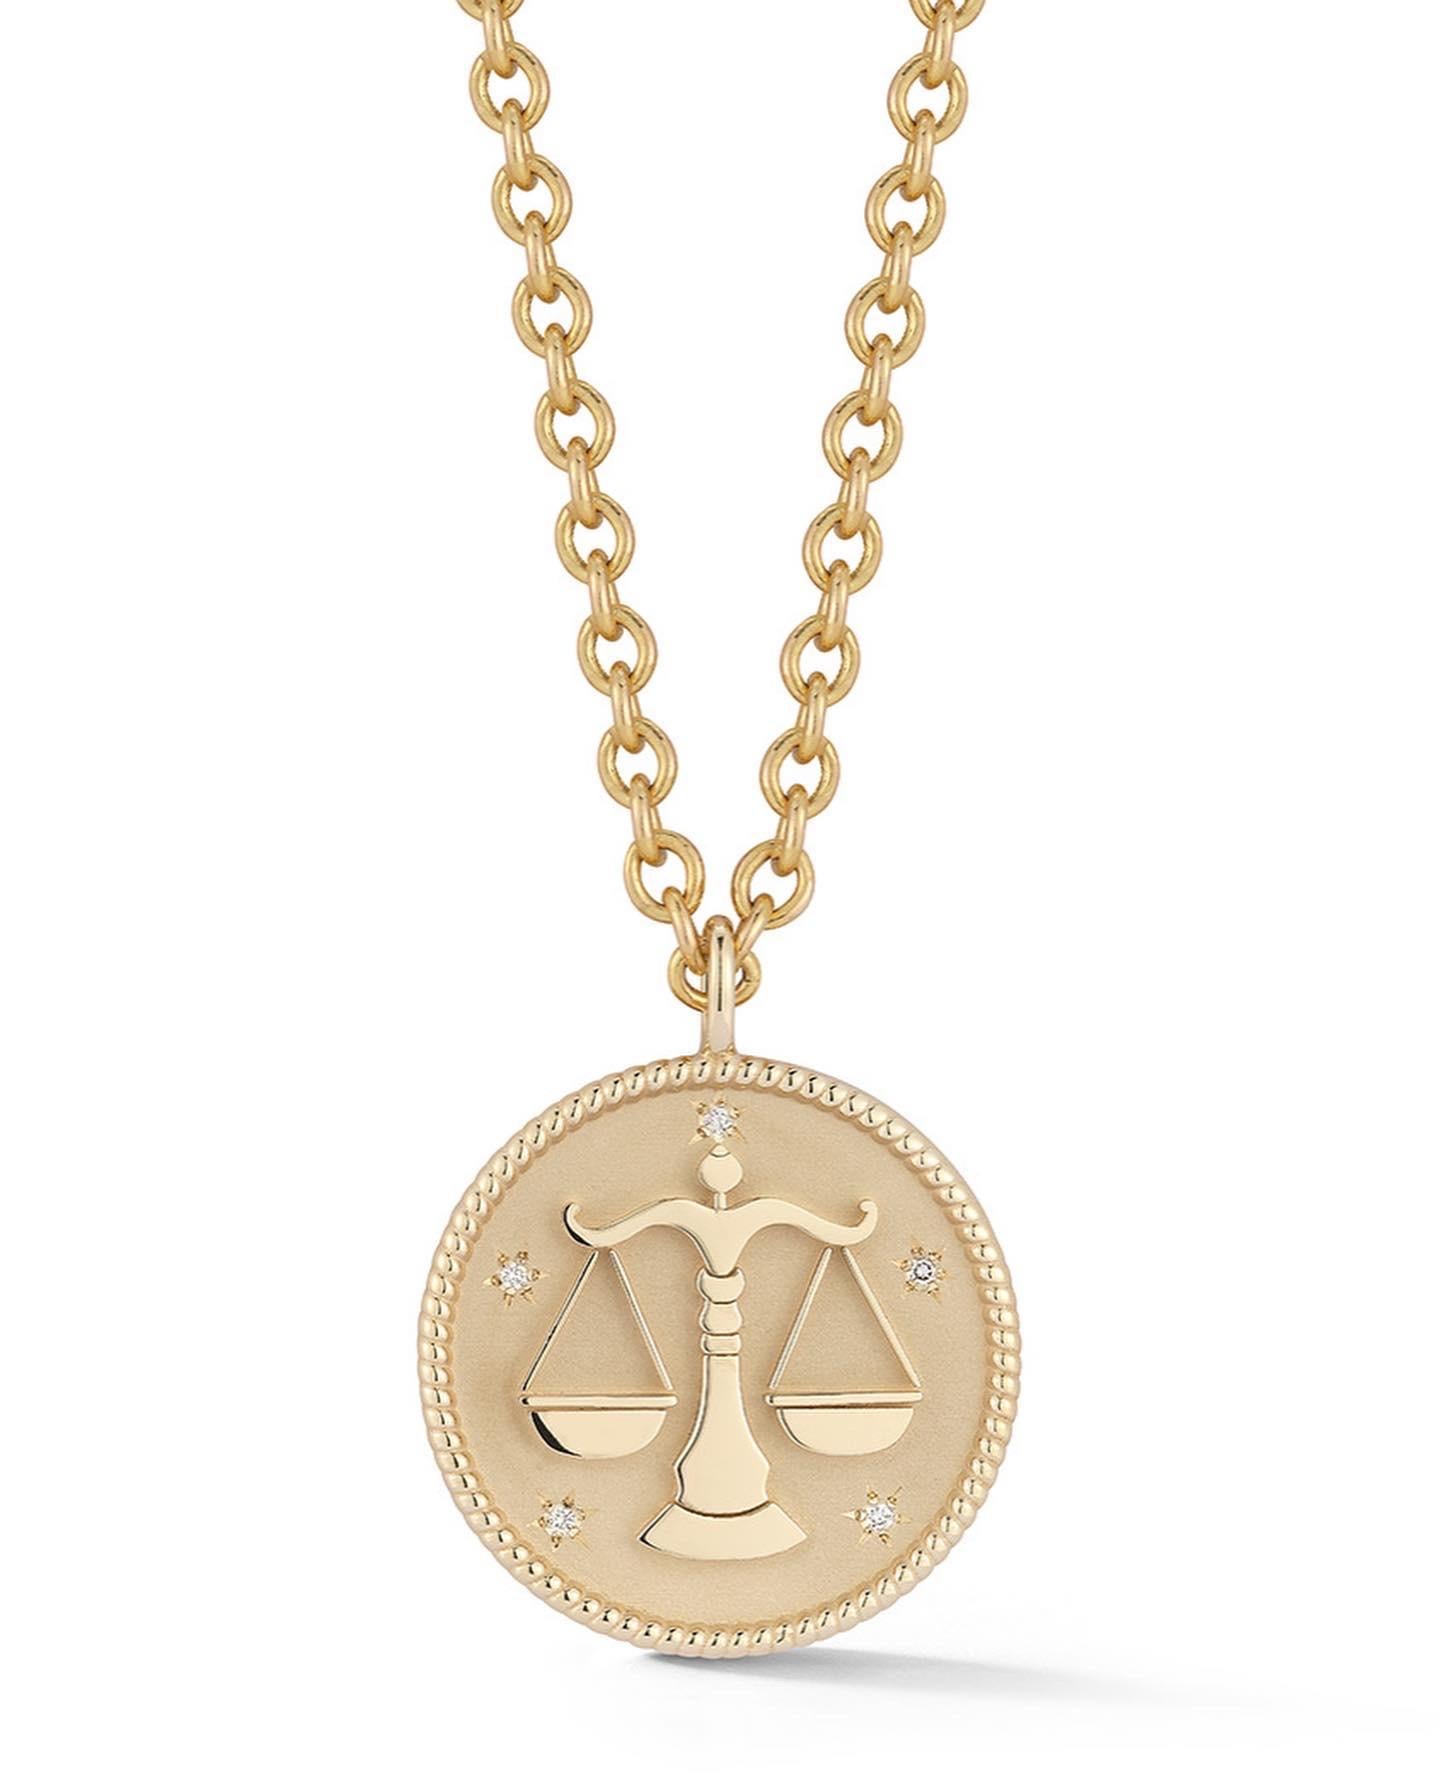 Garland Collection Diamond and Gold Leo Zodiac Medallion For Sale 11